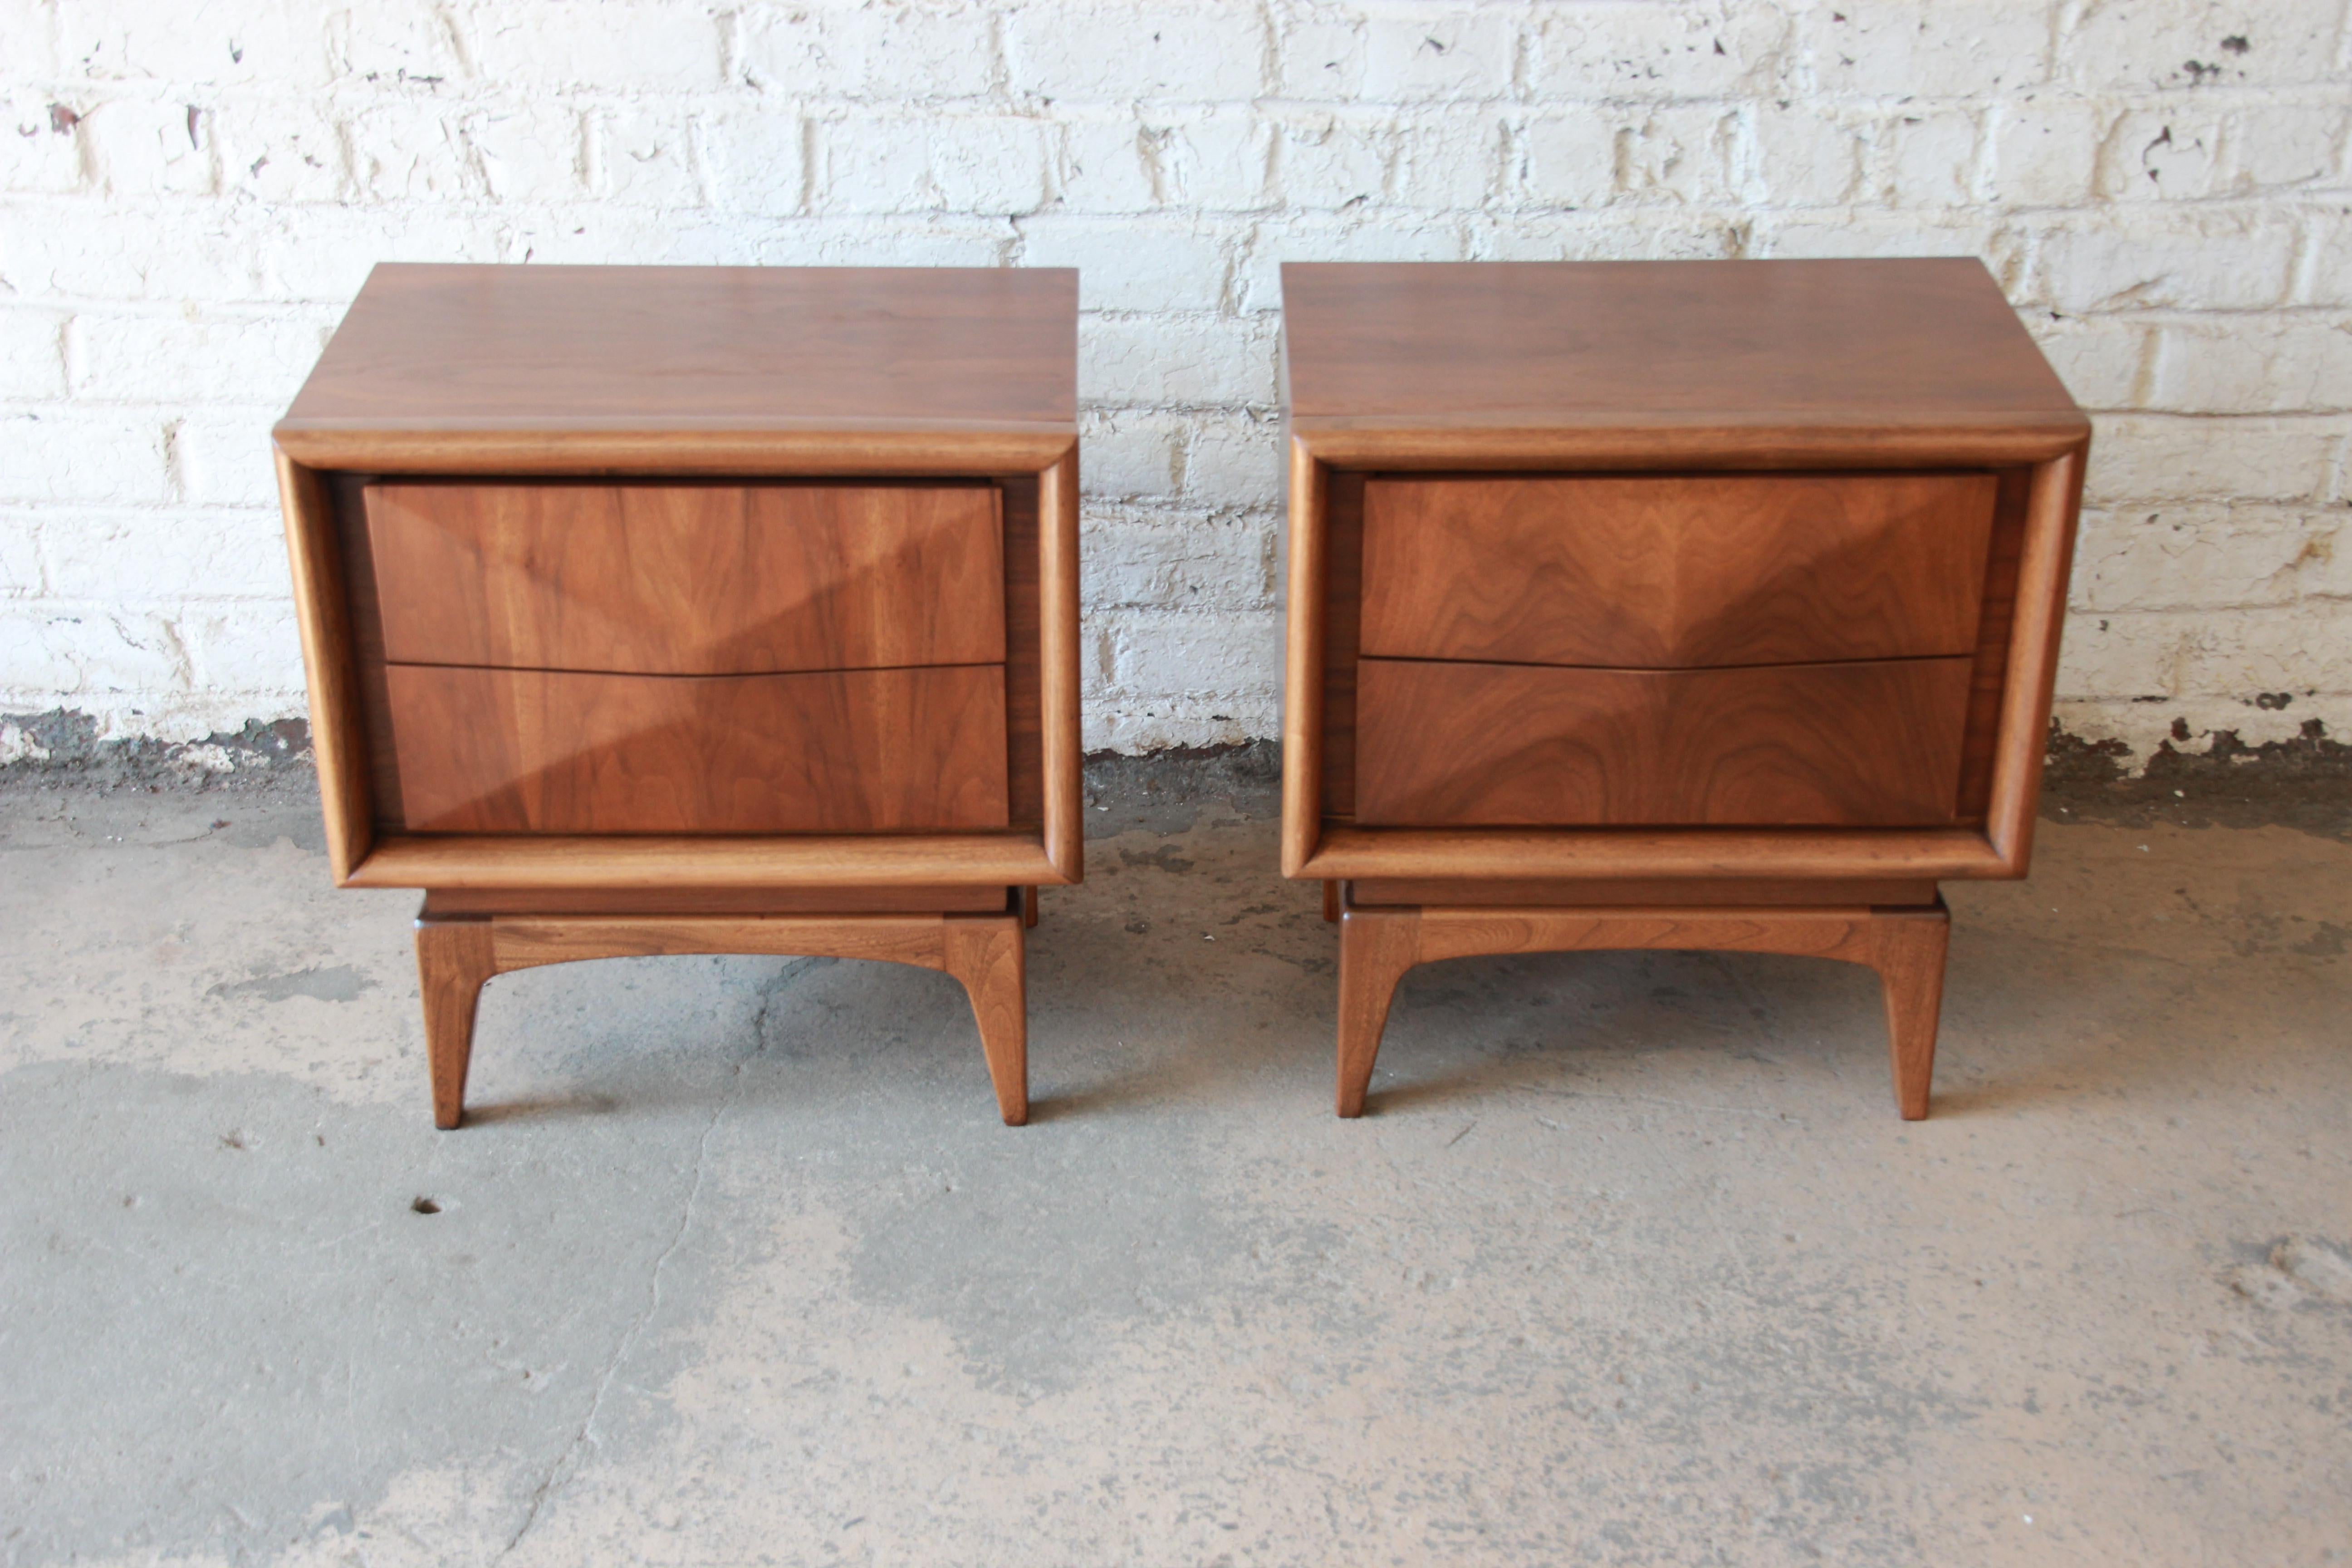 American Mid-Century Modern Diamond Front Nightstands by United